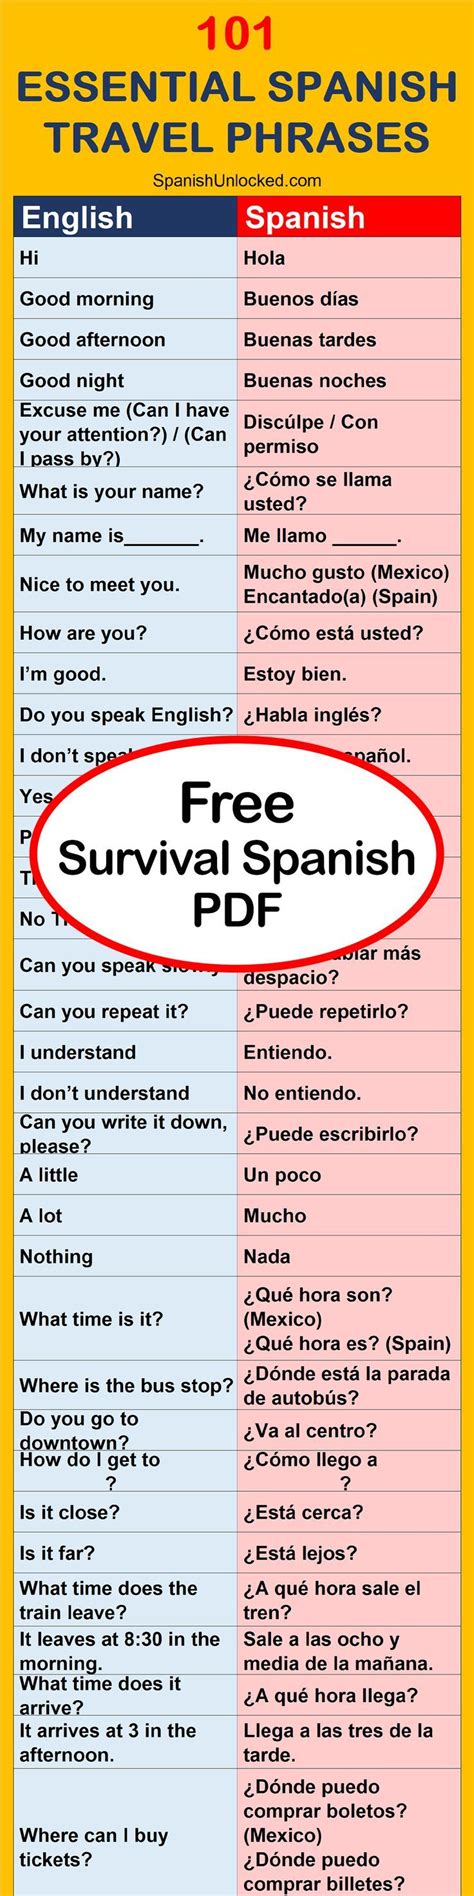 Download This Free Essential Spanish Travel Phrases Guide Before You